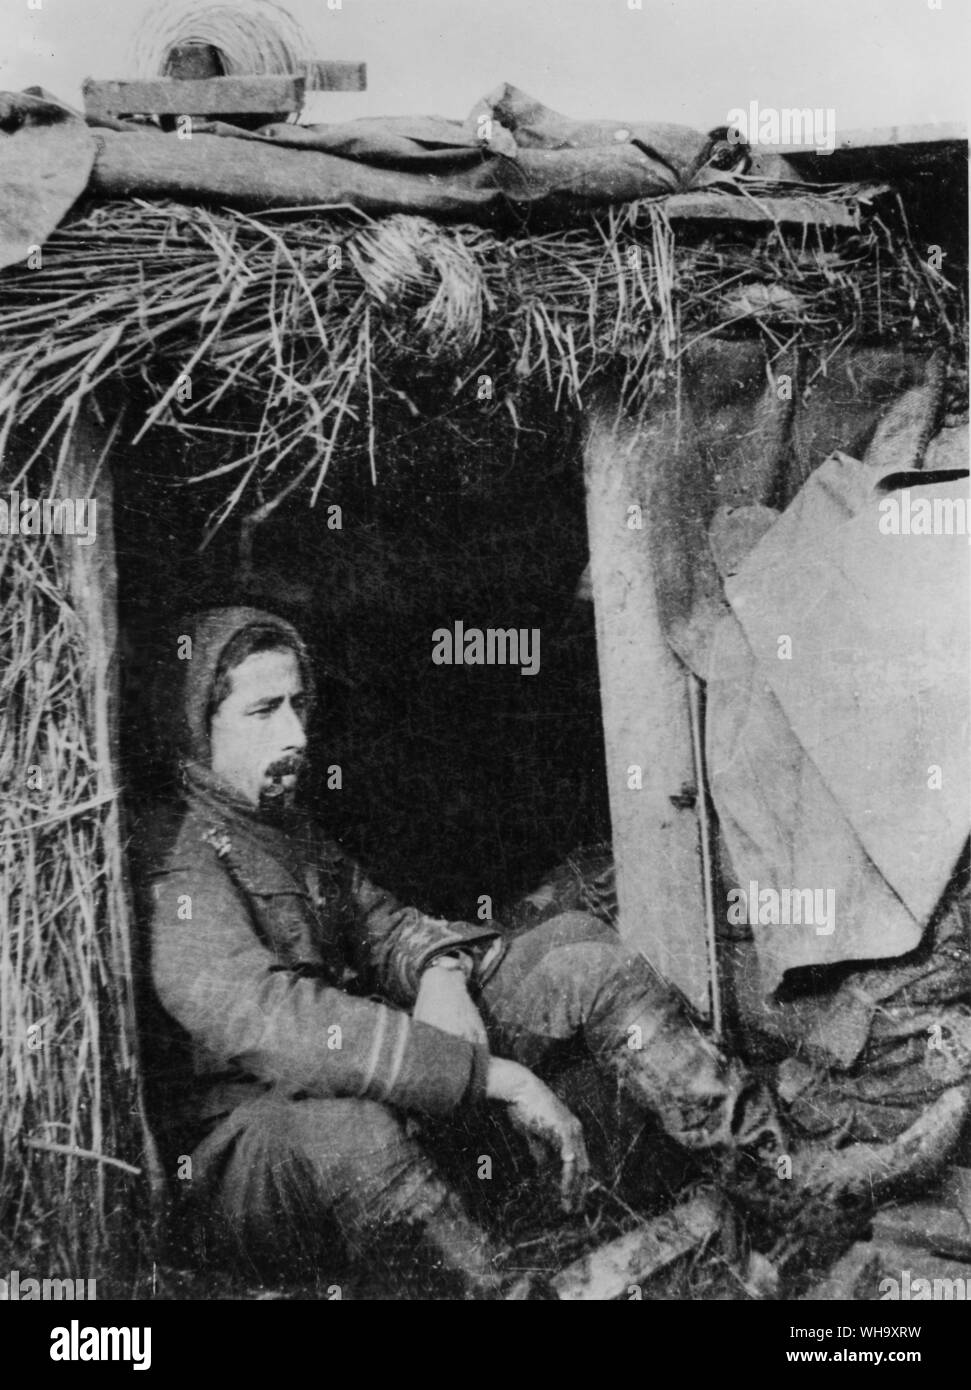 WW1: British officer at entrance to dug-out. Western Front, 1914. Stock Photo